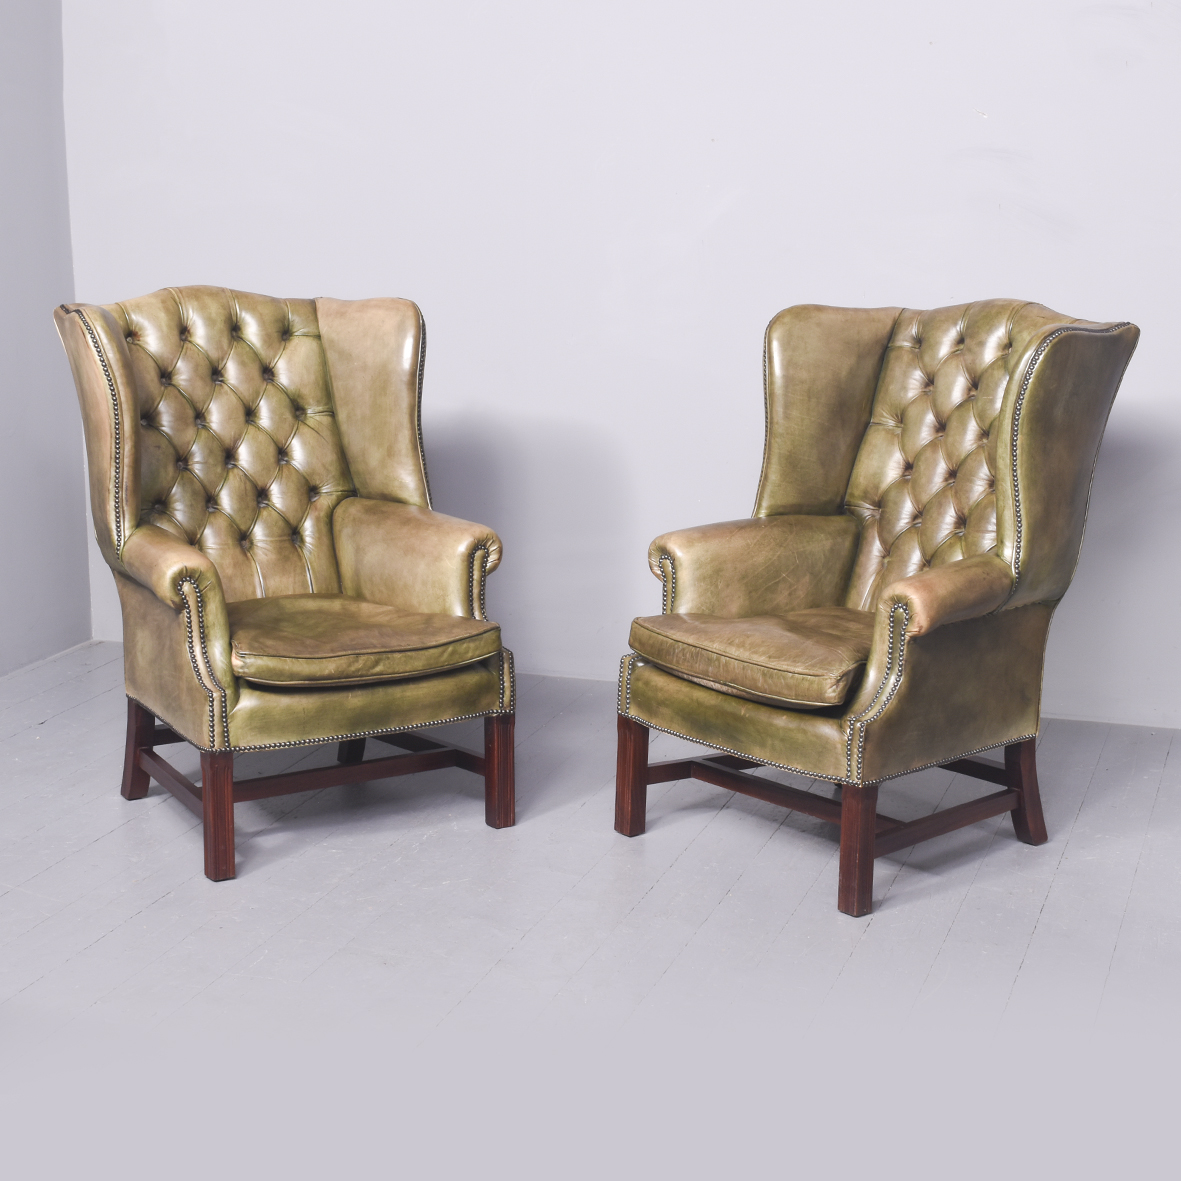 Pair of Georgian Style Wing Chairs Antique Chairs